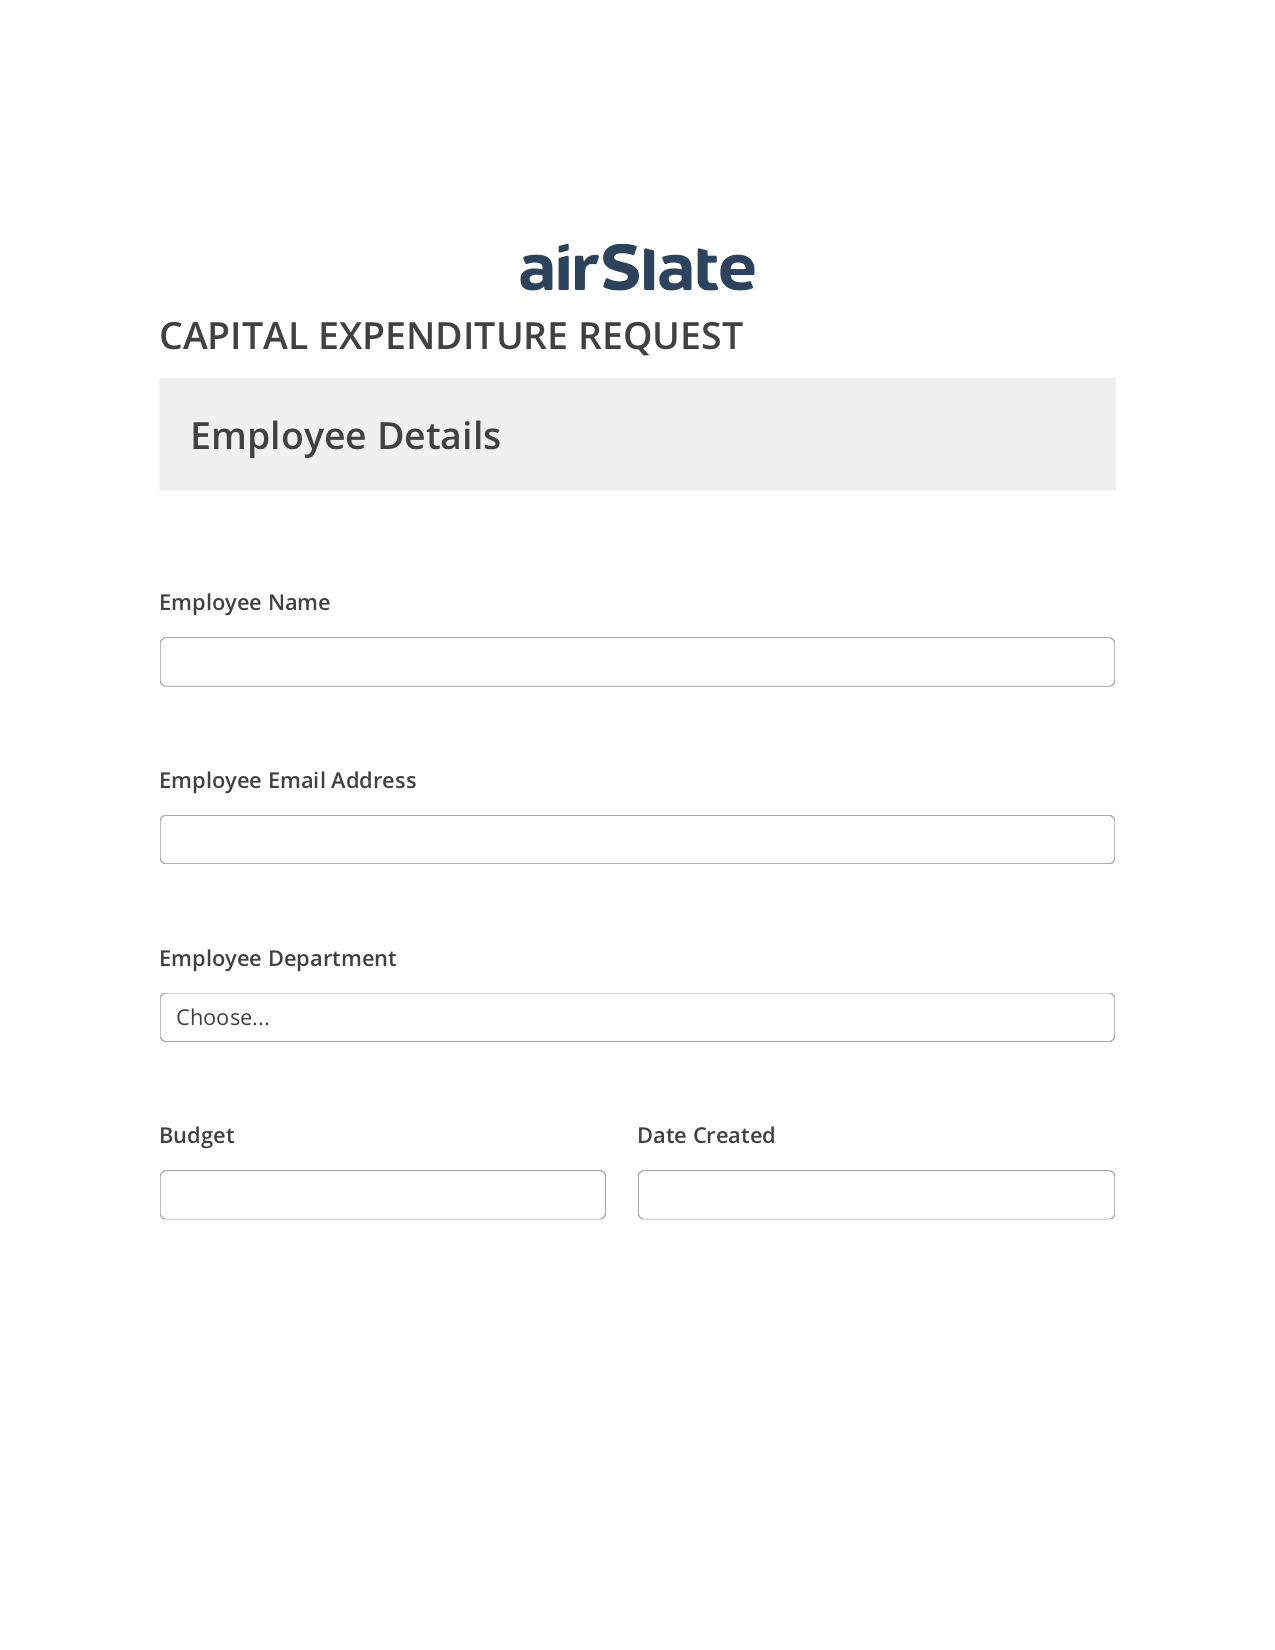 Capital Expenditure Request Approval Workflow Prefill from NetSuite records, Assign Roles to Recipients Bot, Export to NetSuite